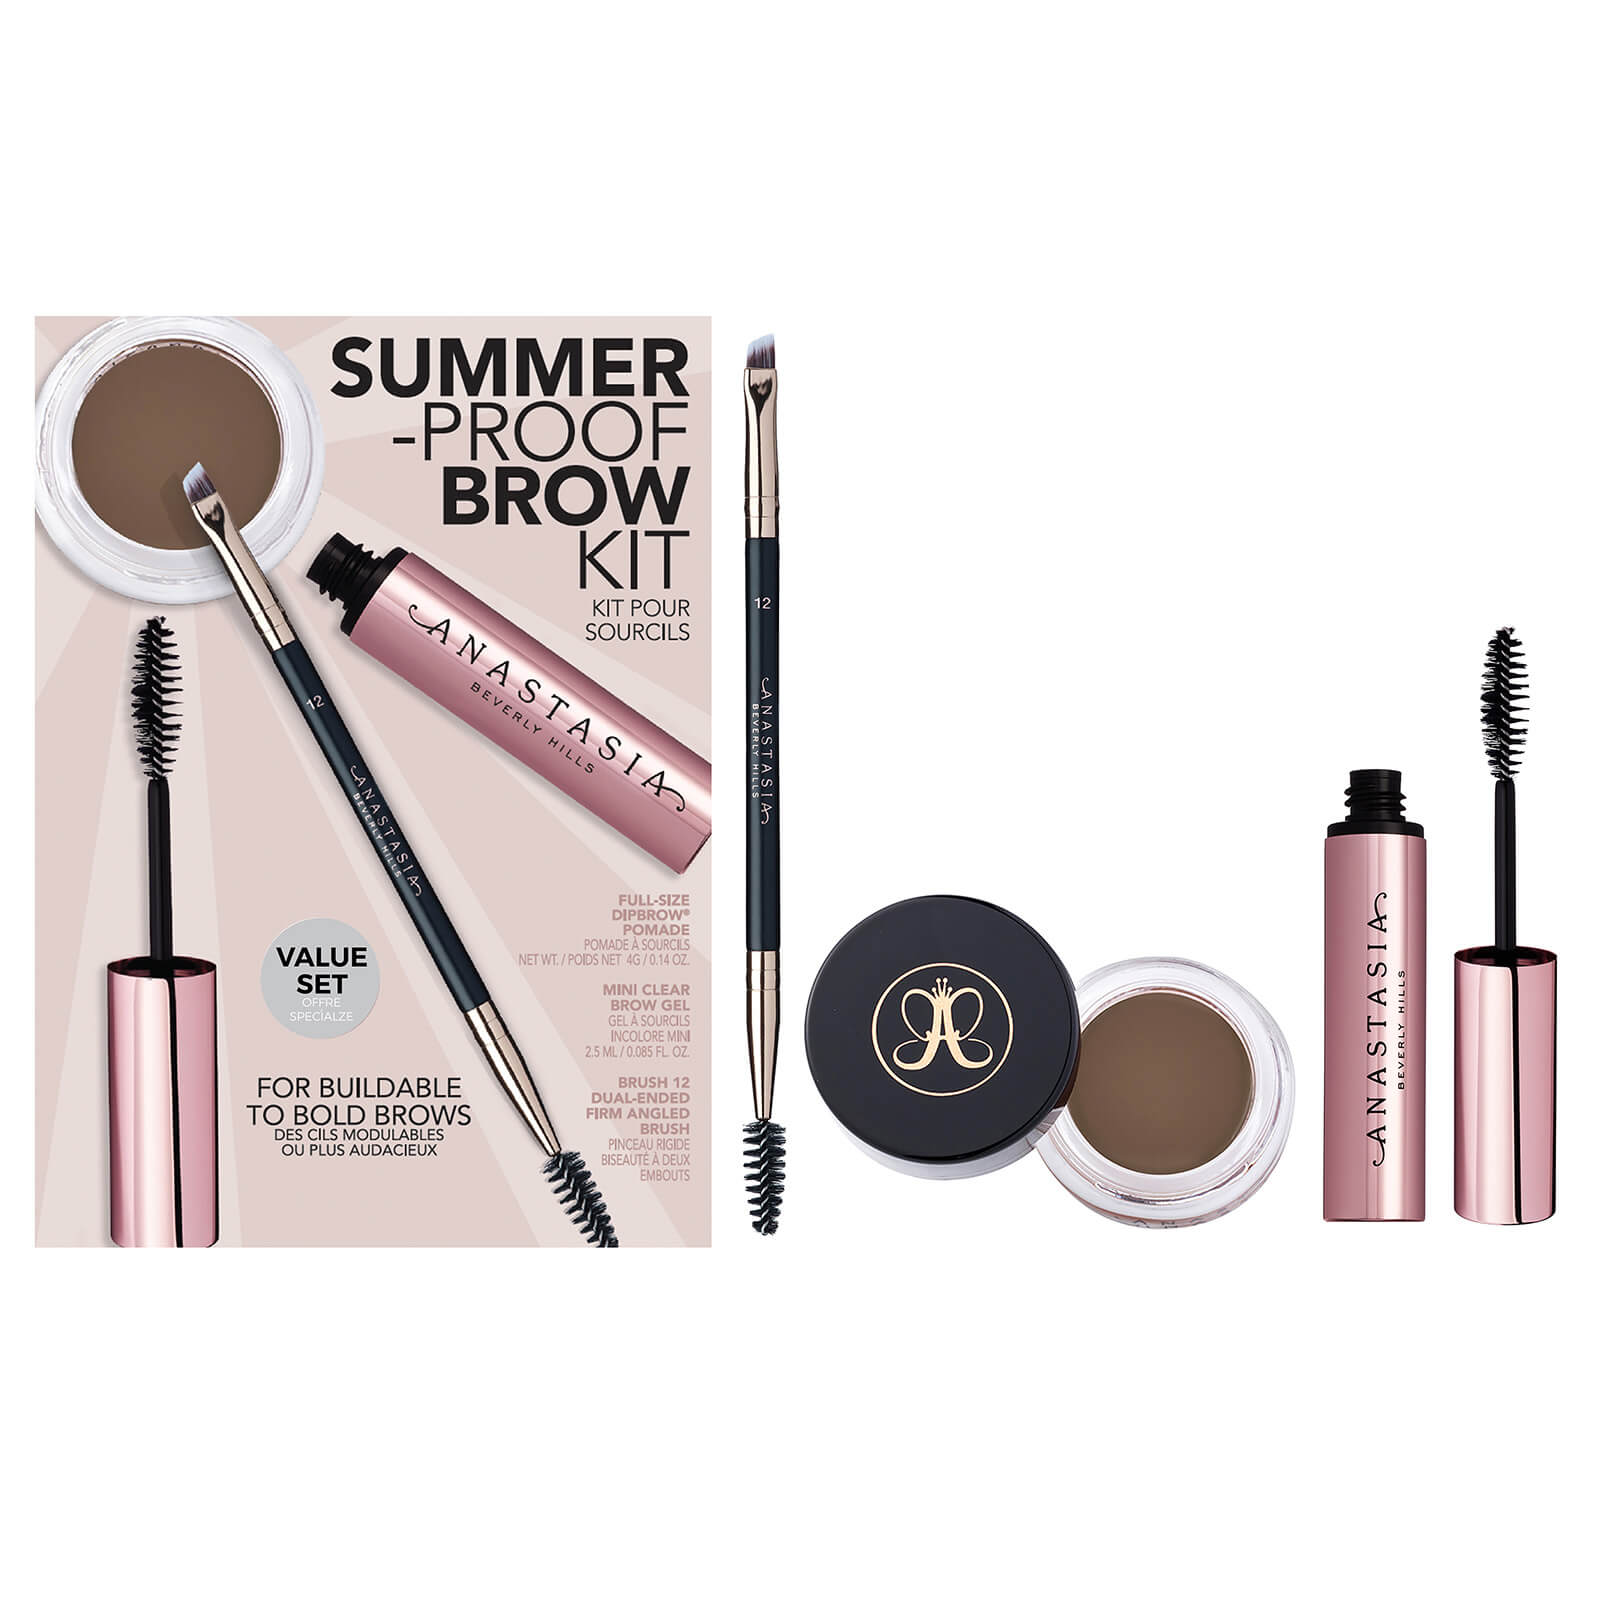 Image of Anastasia Beverly Hills Summer-Proof Brow Kit (Various Shades) - Soft Brown